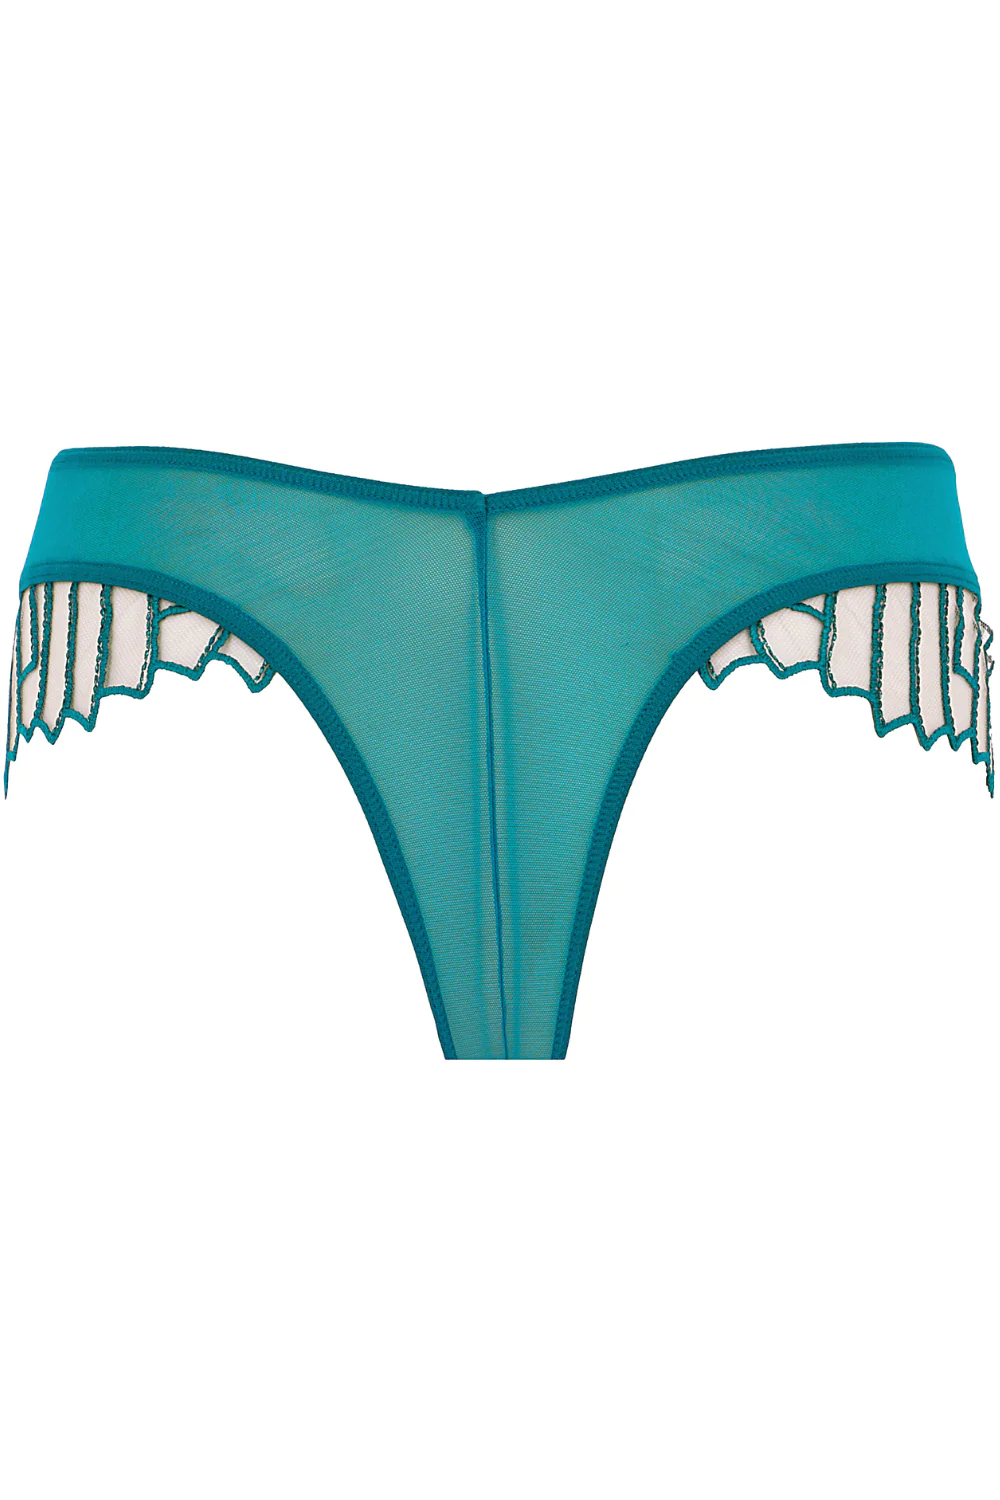 Cosmic Dream Embroidered Tulle Shorty Panty - Lagoon